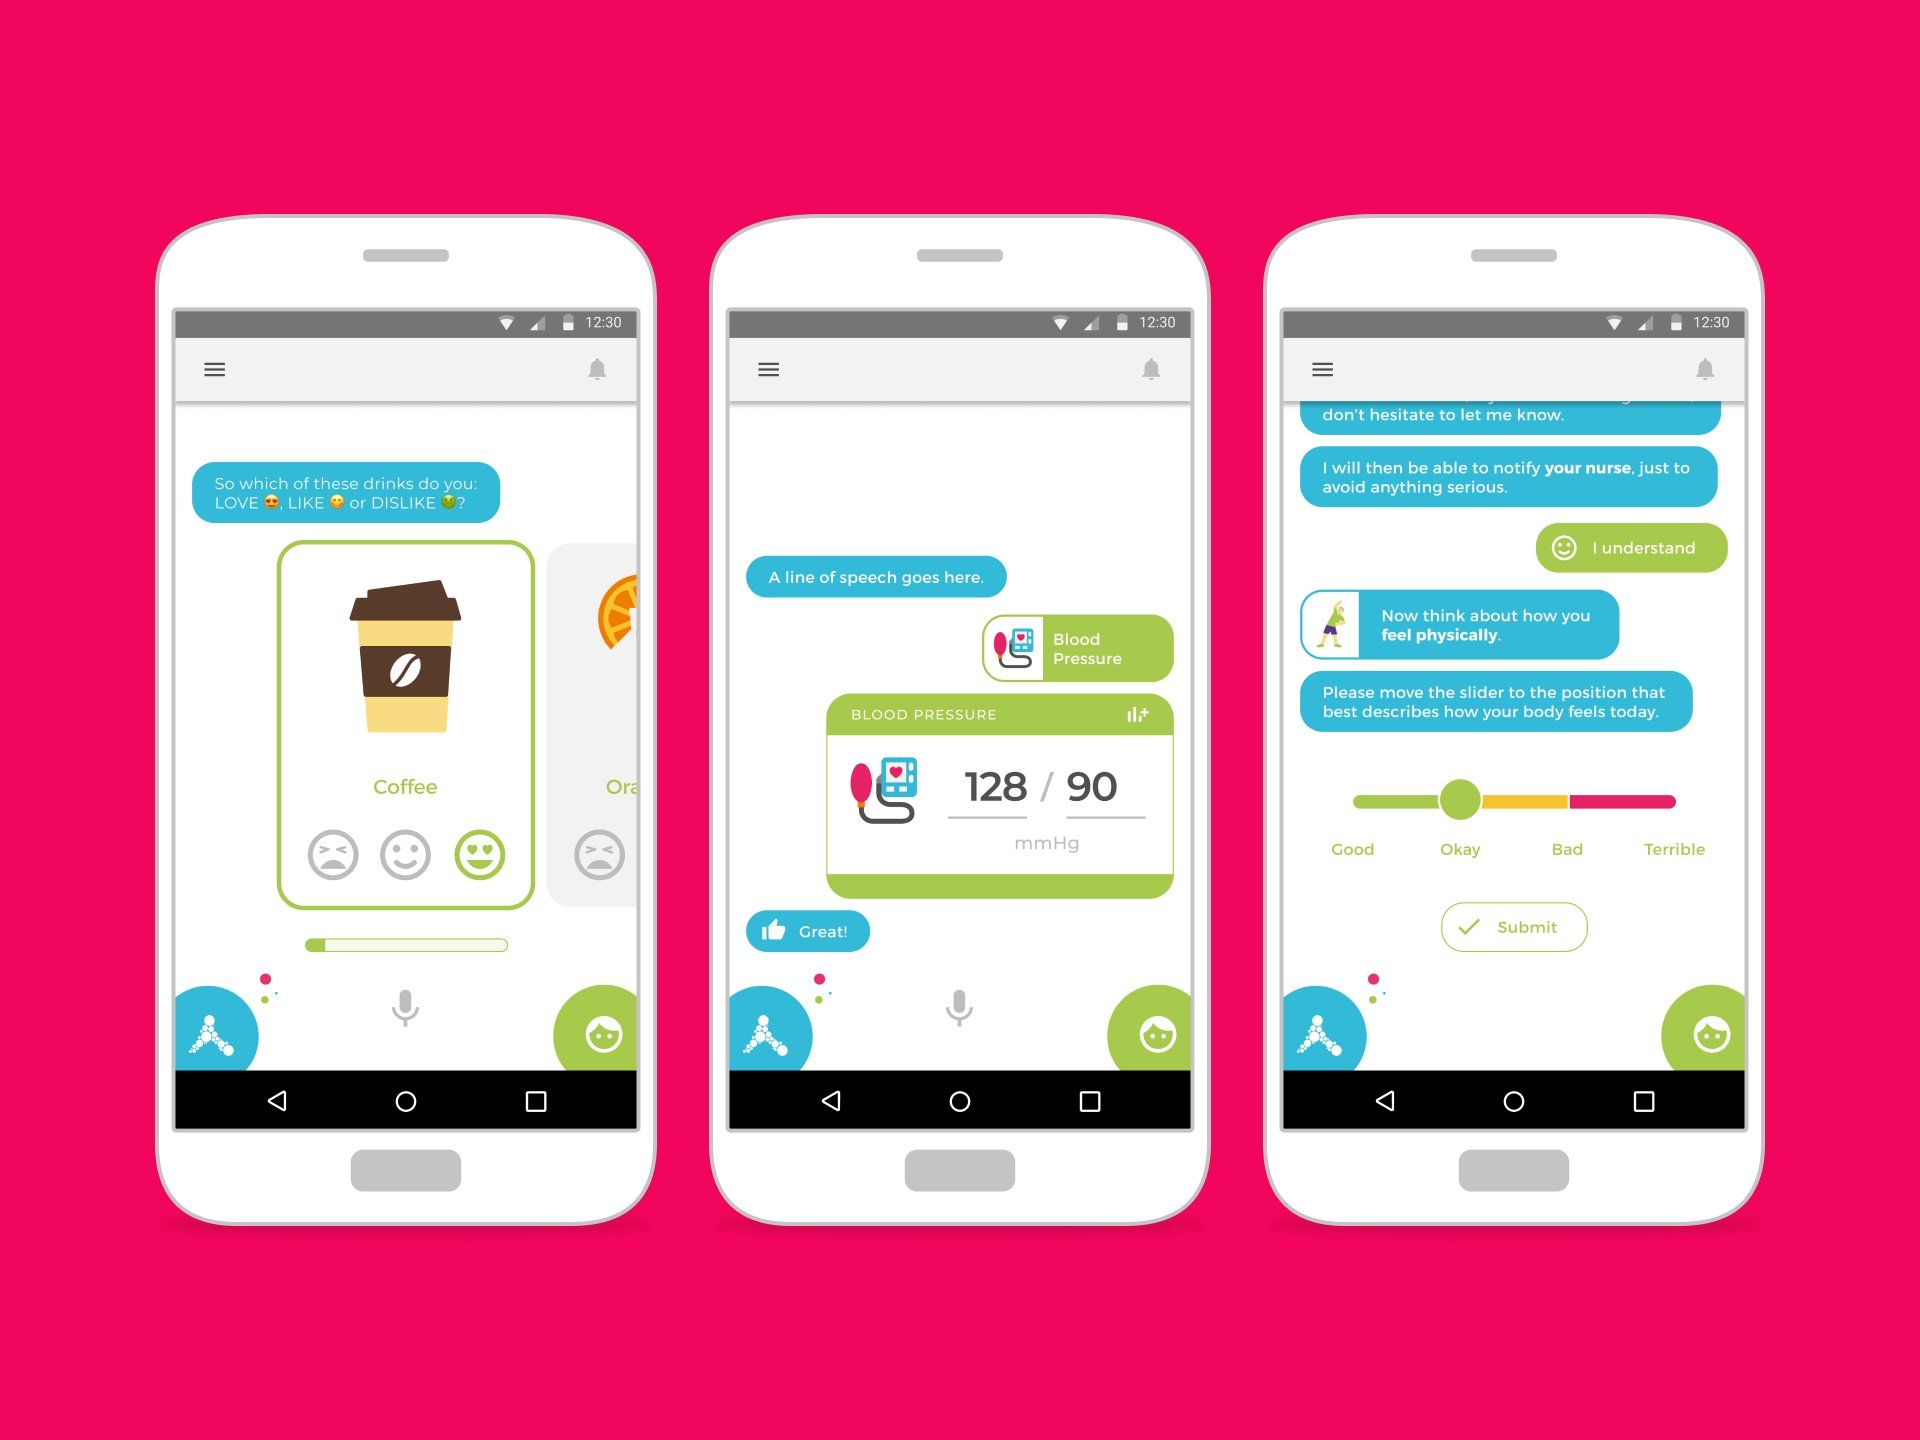 UX design examples of Inavya Ventures' AVATR chatbot app. © The Animo Group Ltd.